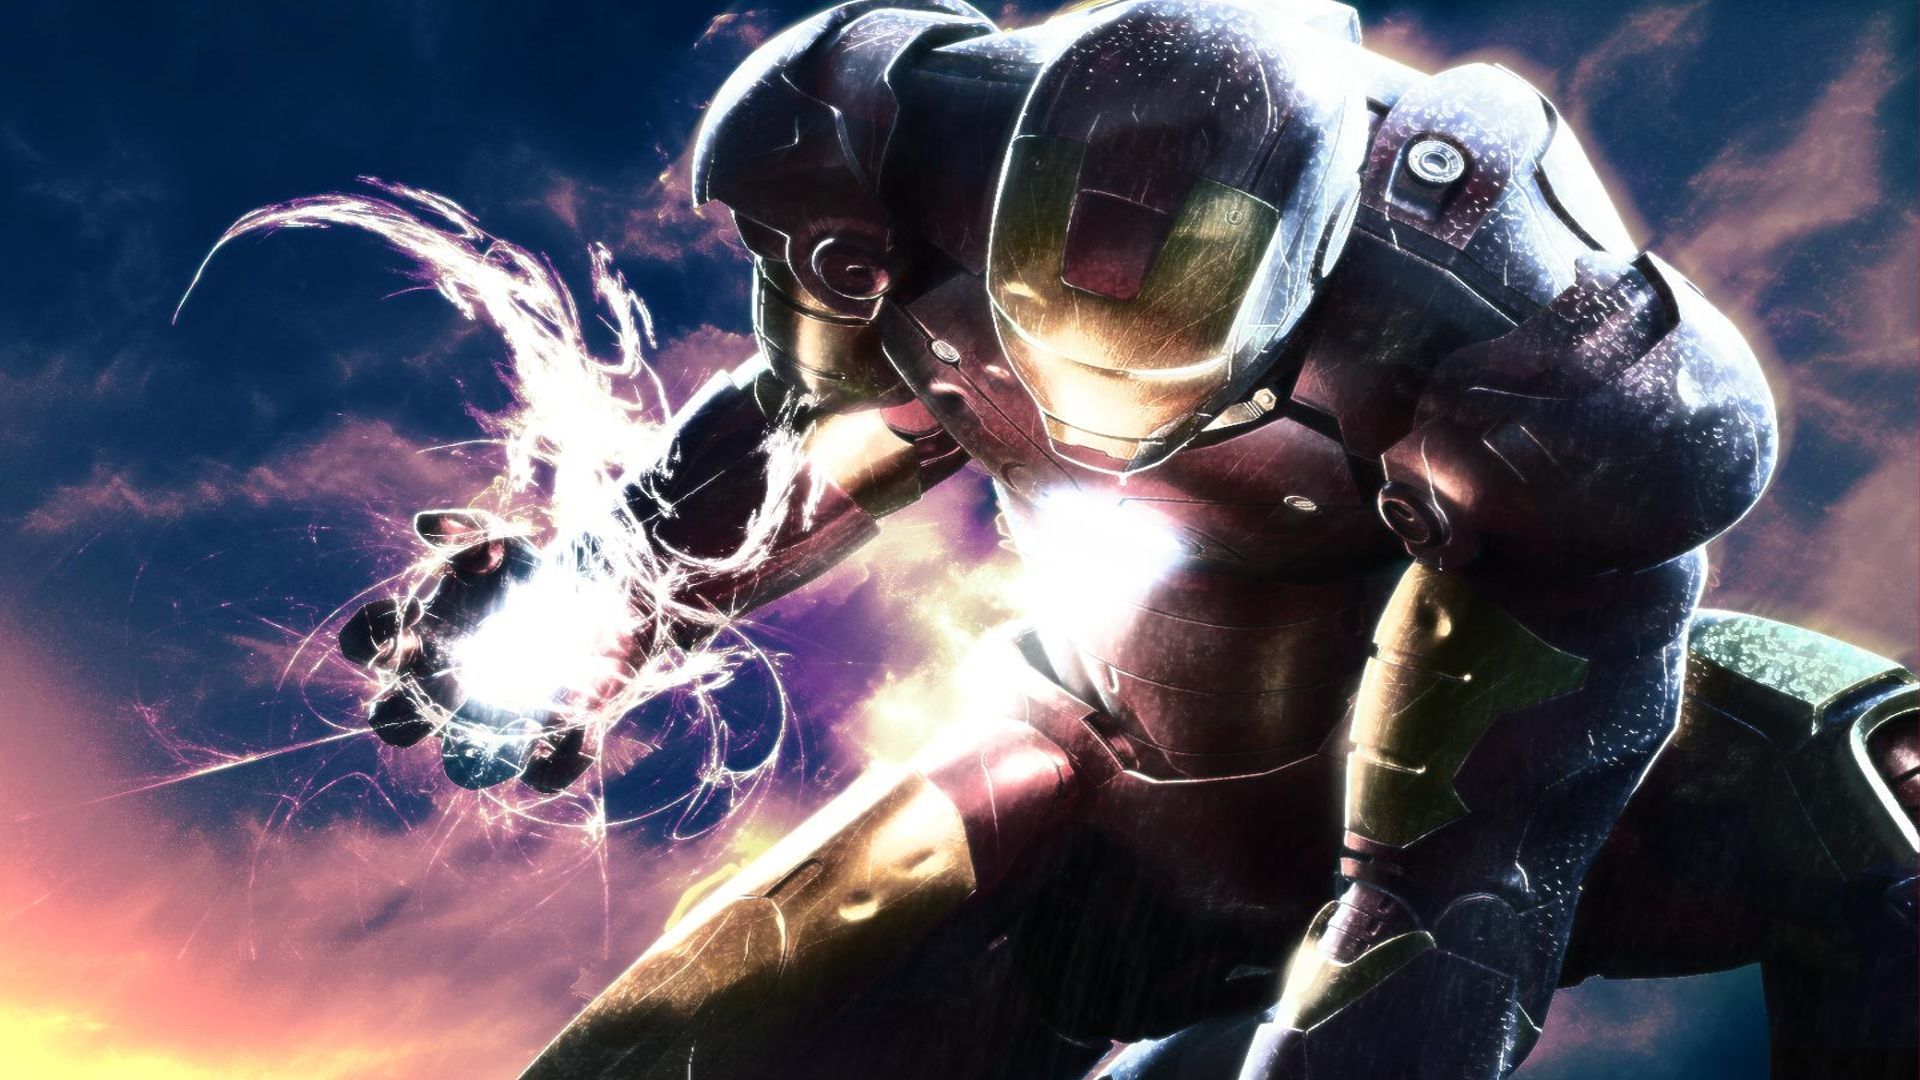 Iron Man HD Background Wallpapers 7881 - HD Wallpaper Site